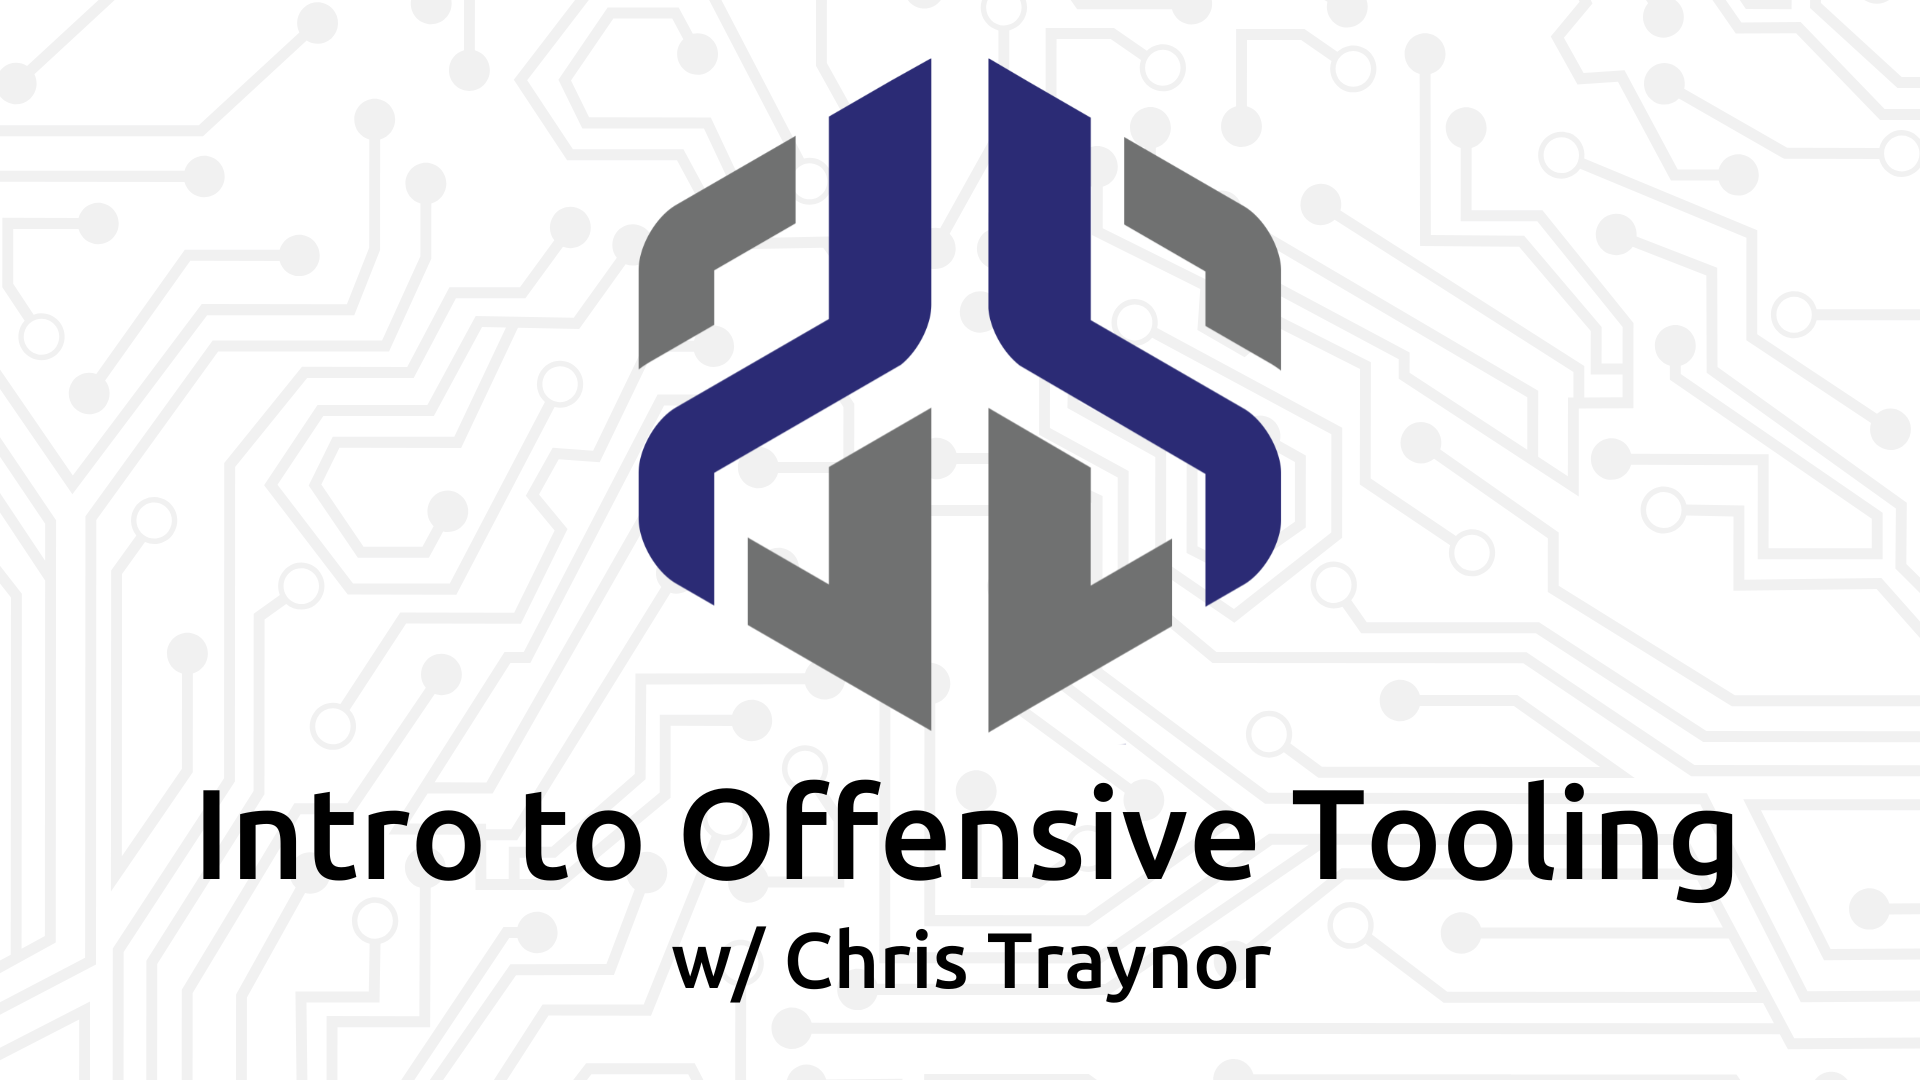 Intro to Offensive Tooling